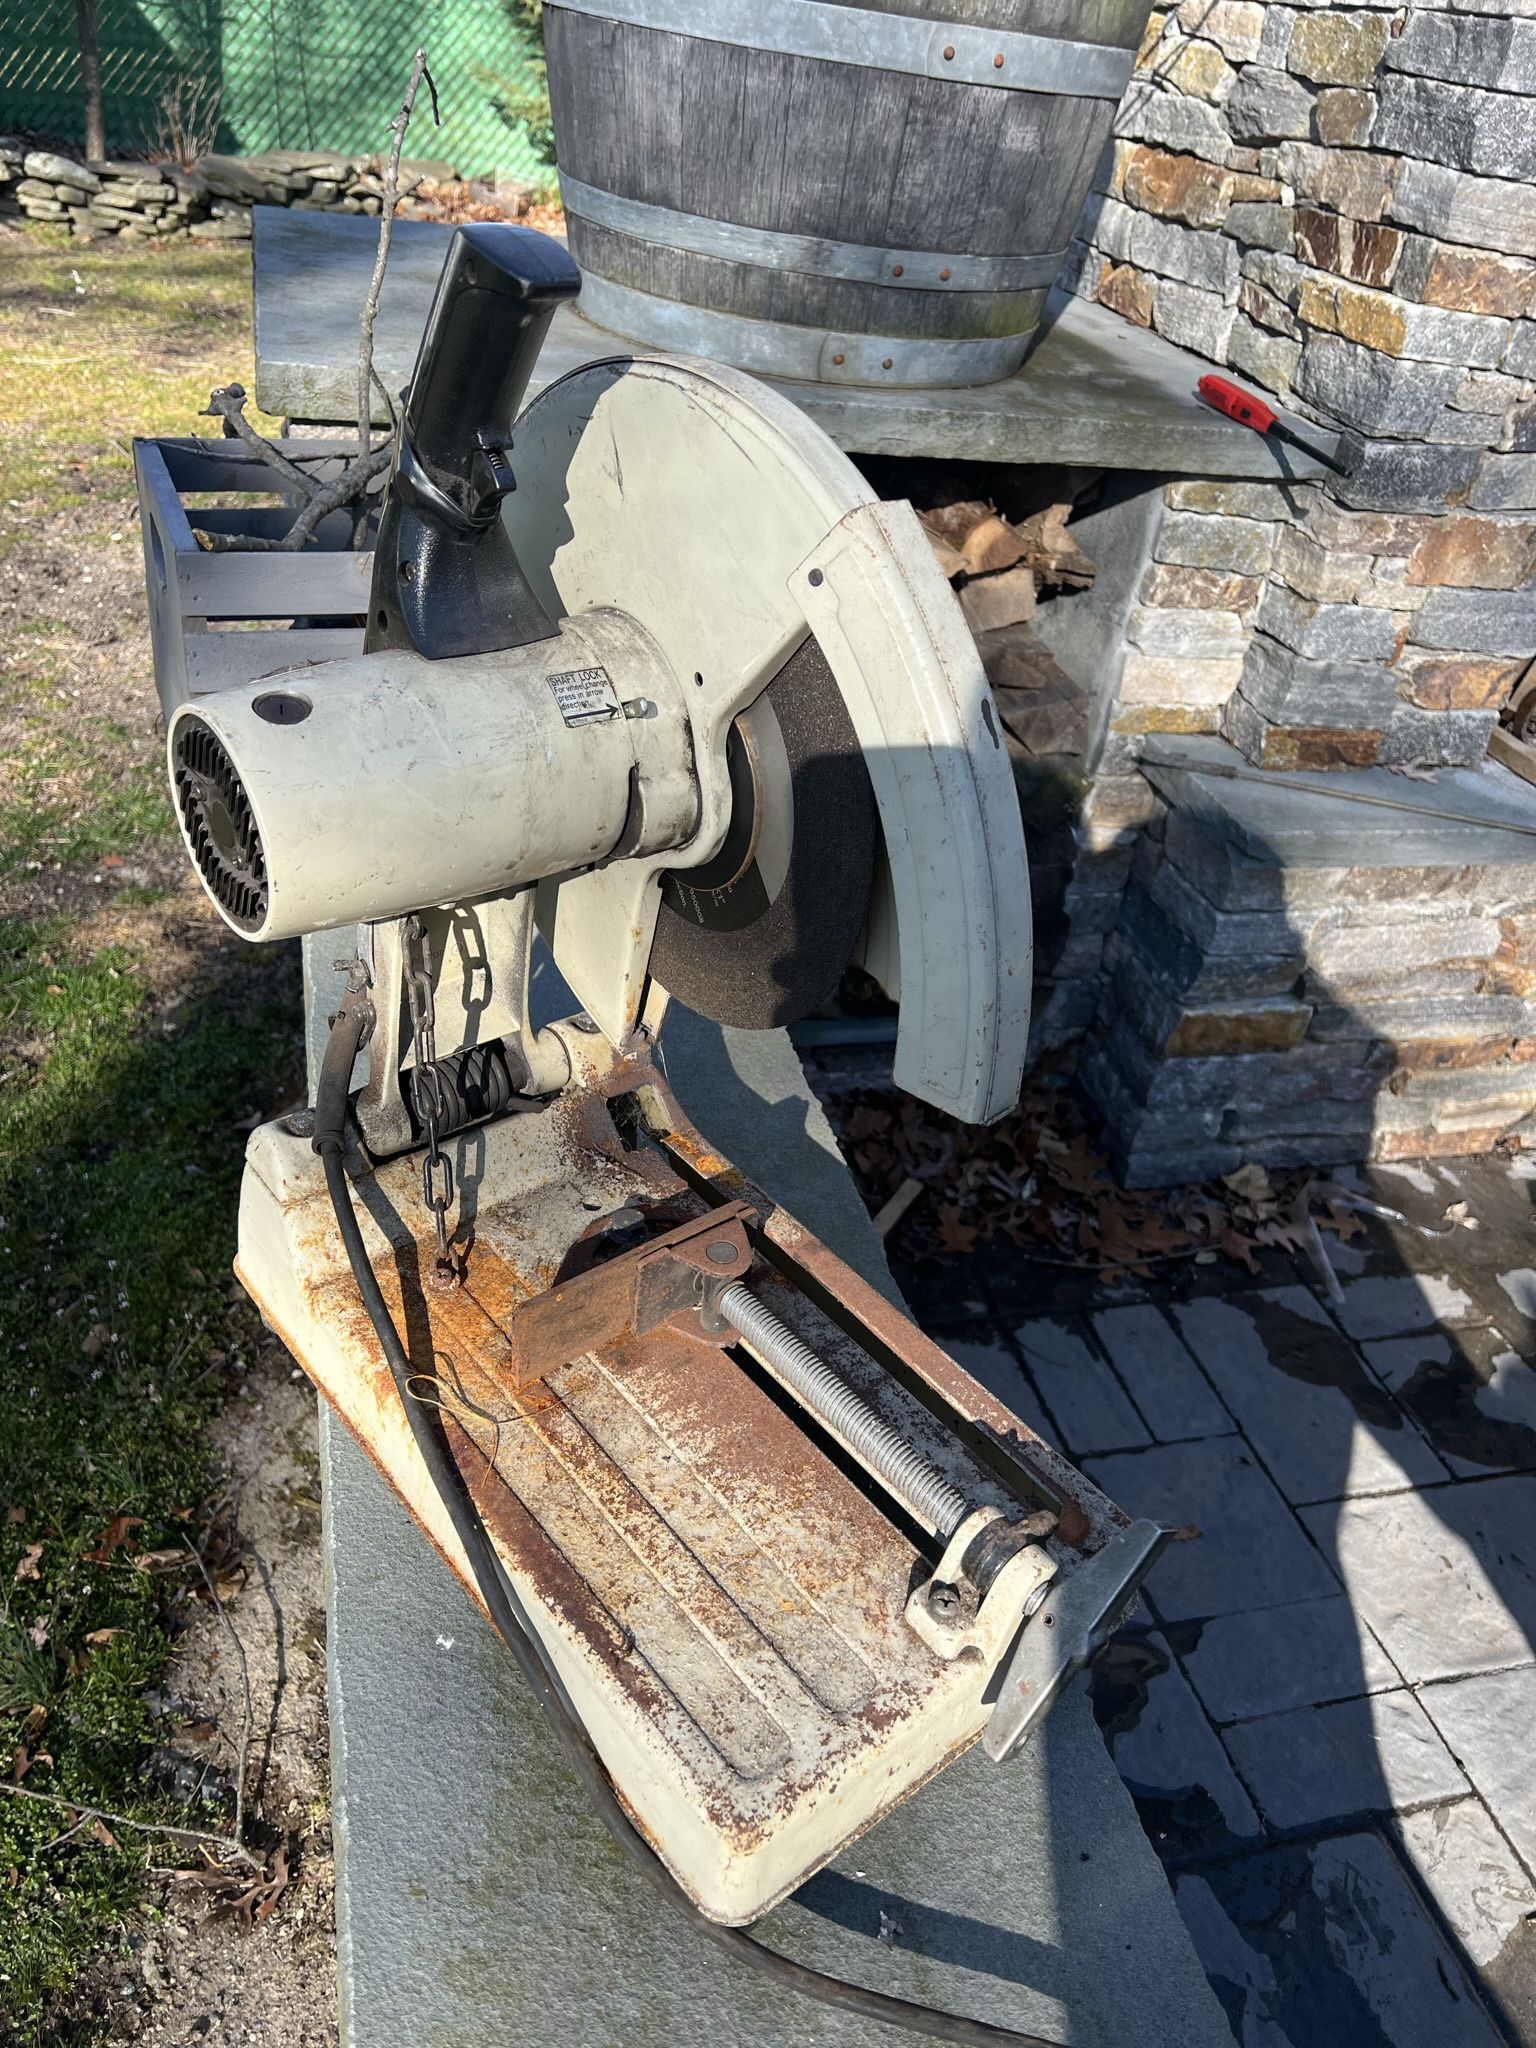 NEW UNOPENED KA SHEET CUTTER for Sale in Hicksville, NY - OfferUp